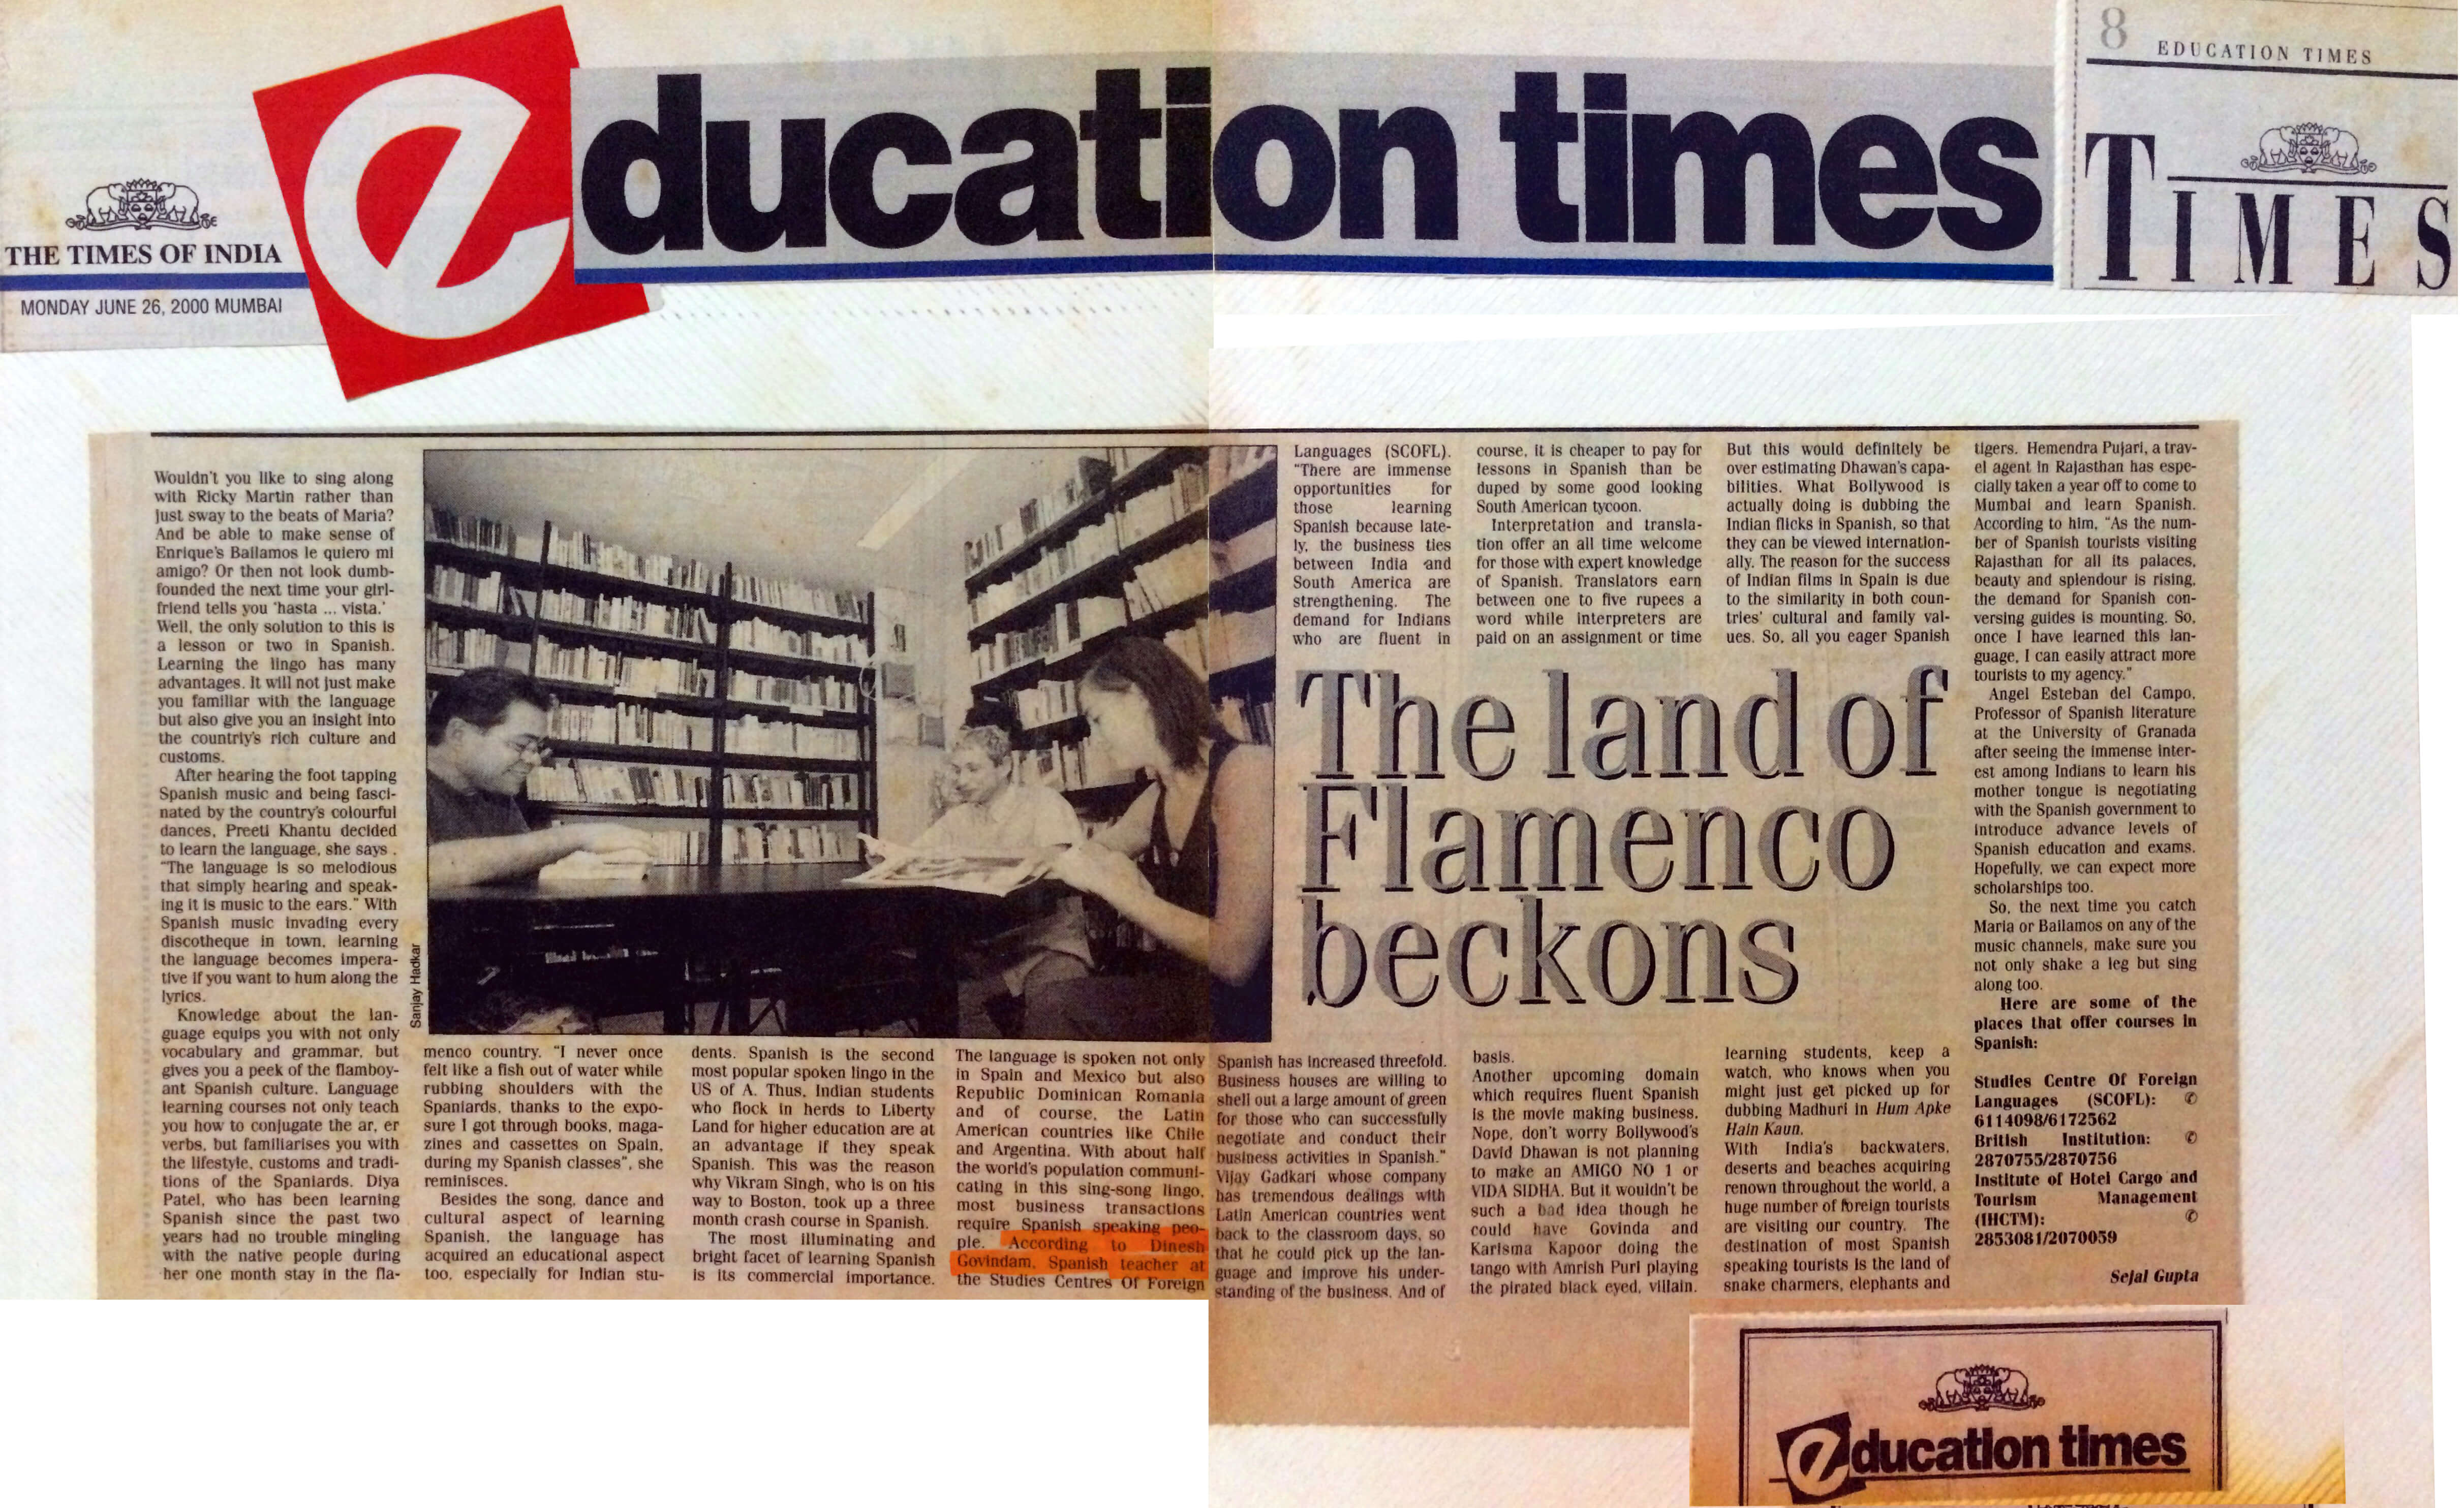 Education Times - The Land of Flamenco Beckons